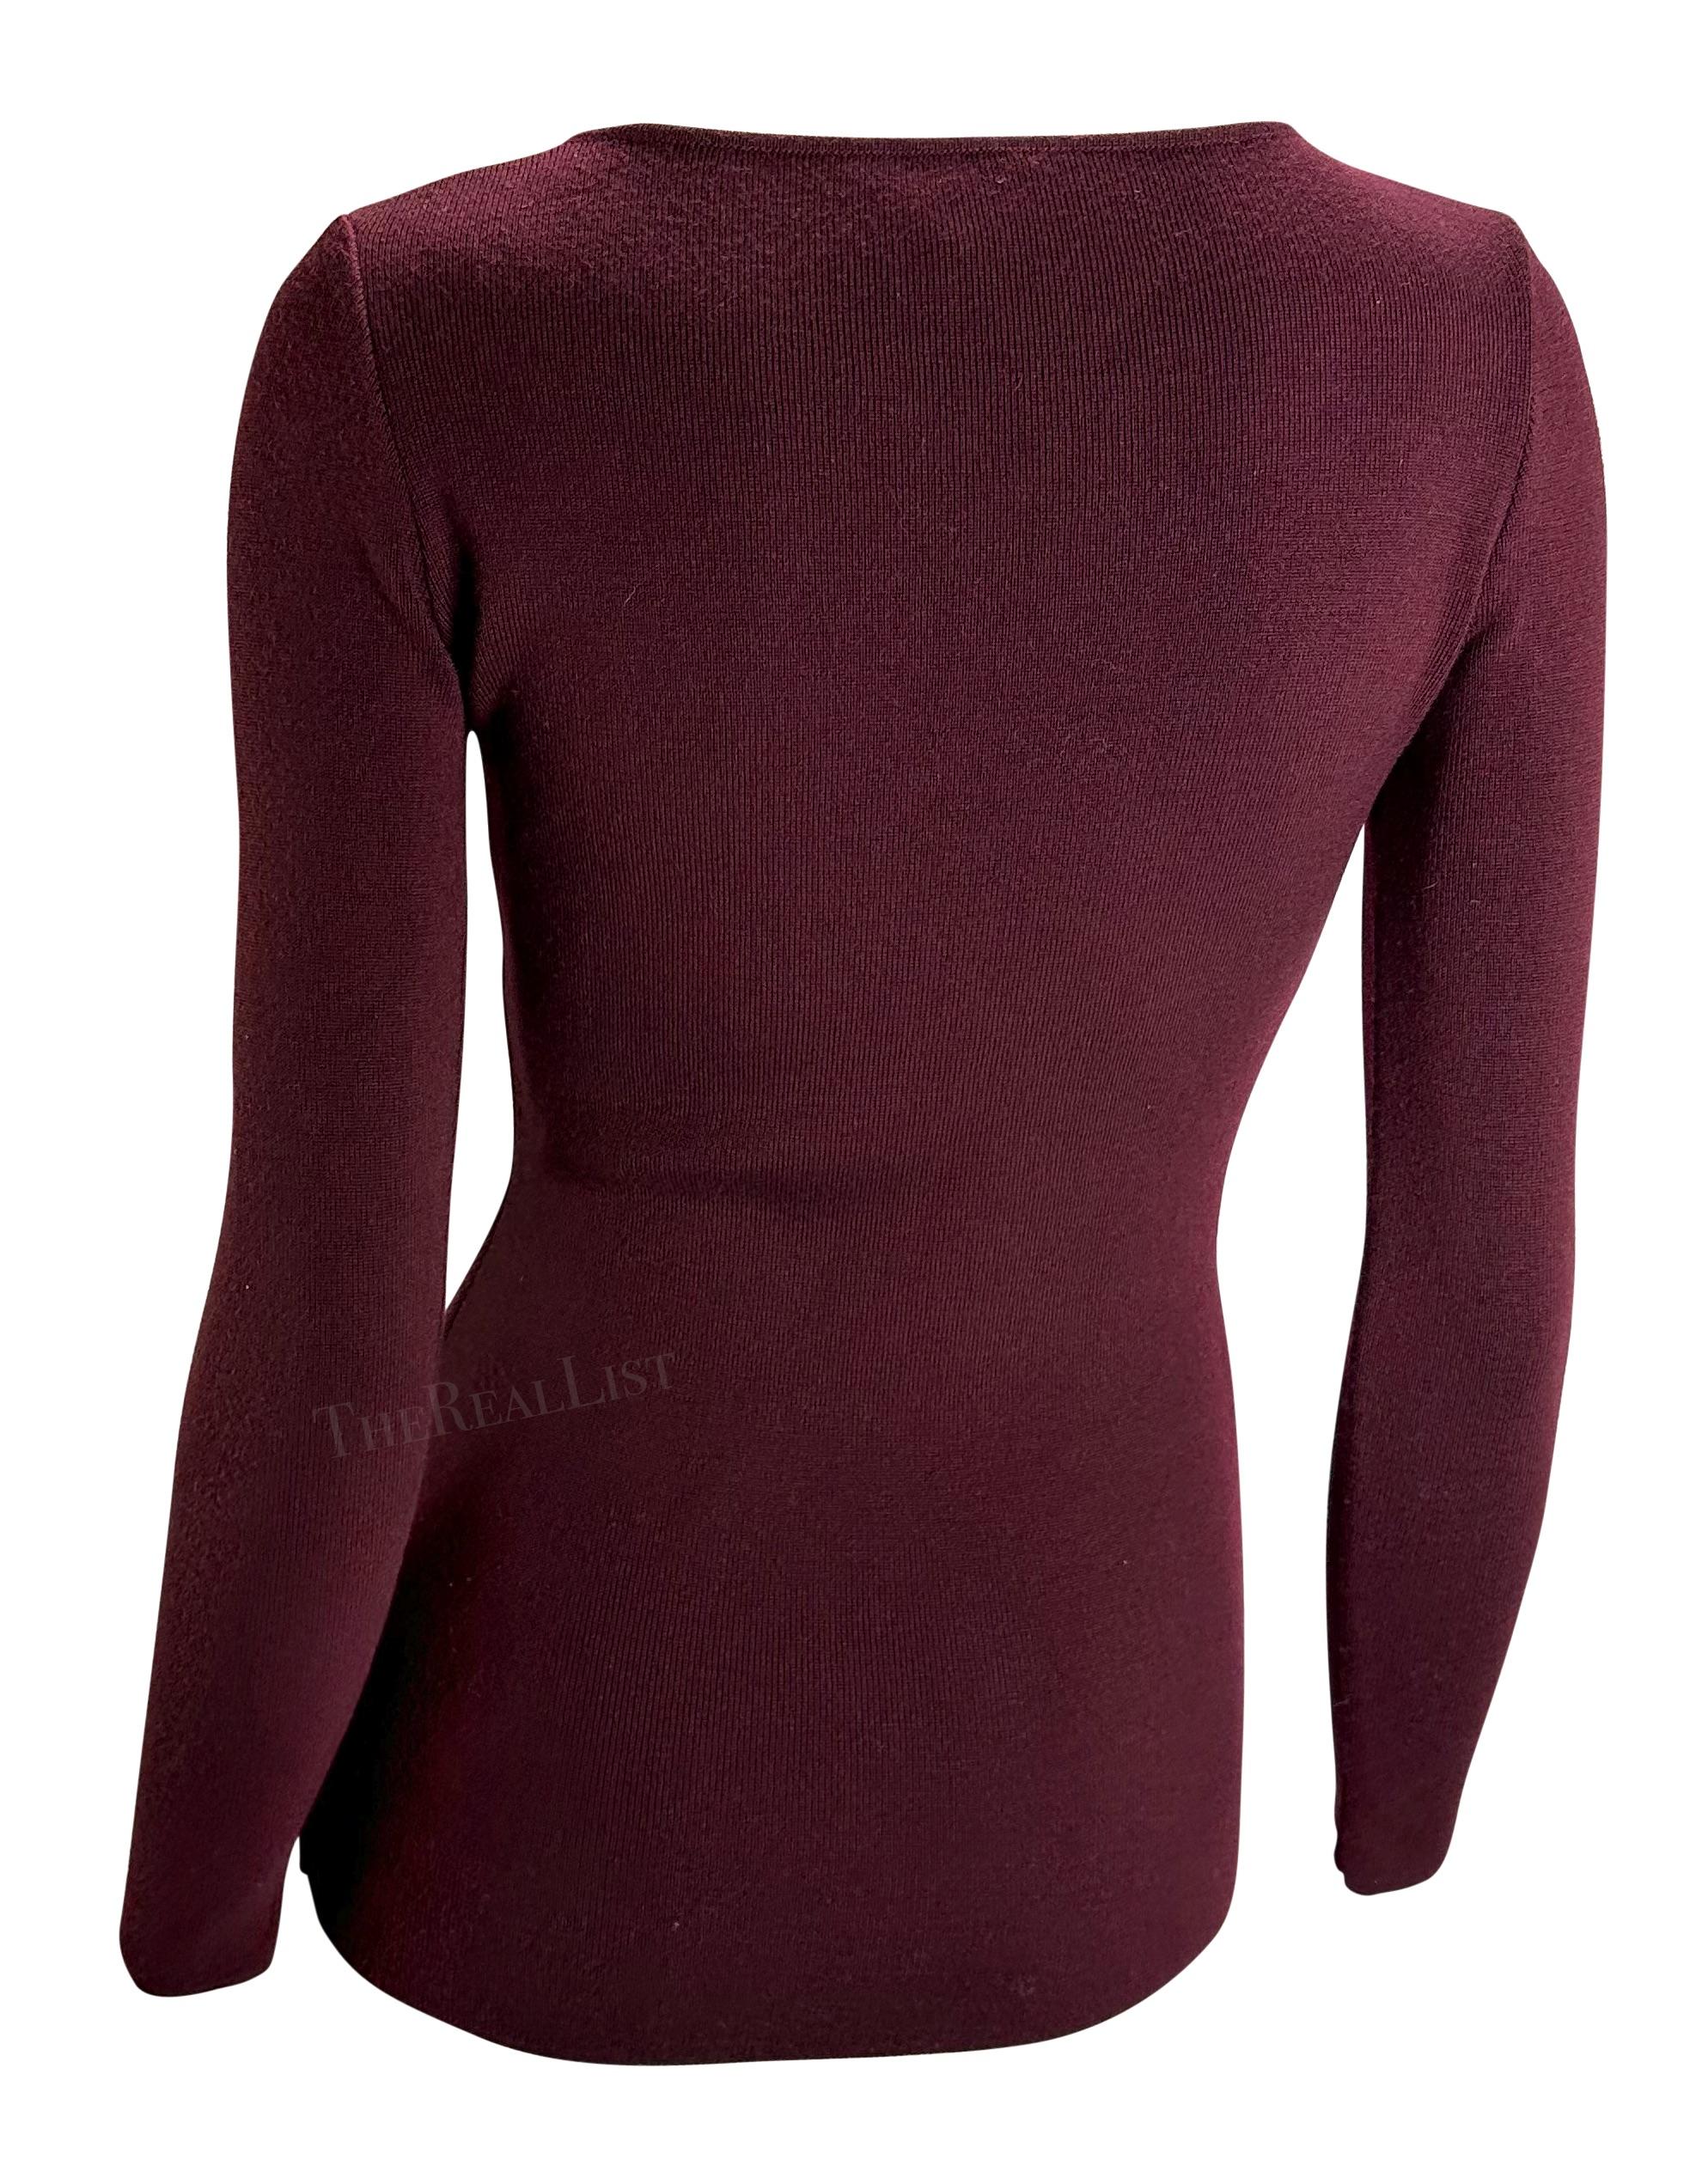 F/W 1996 Gucci by Tom Ford Burgundy Stretch Knit Wool Sweater Top In Excellent Condition For Sale In West Hollywood, CA